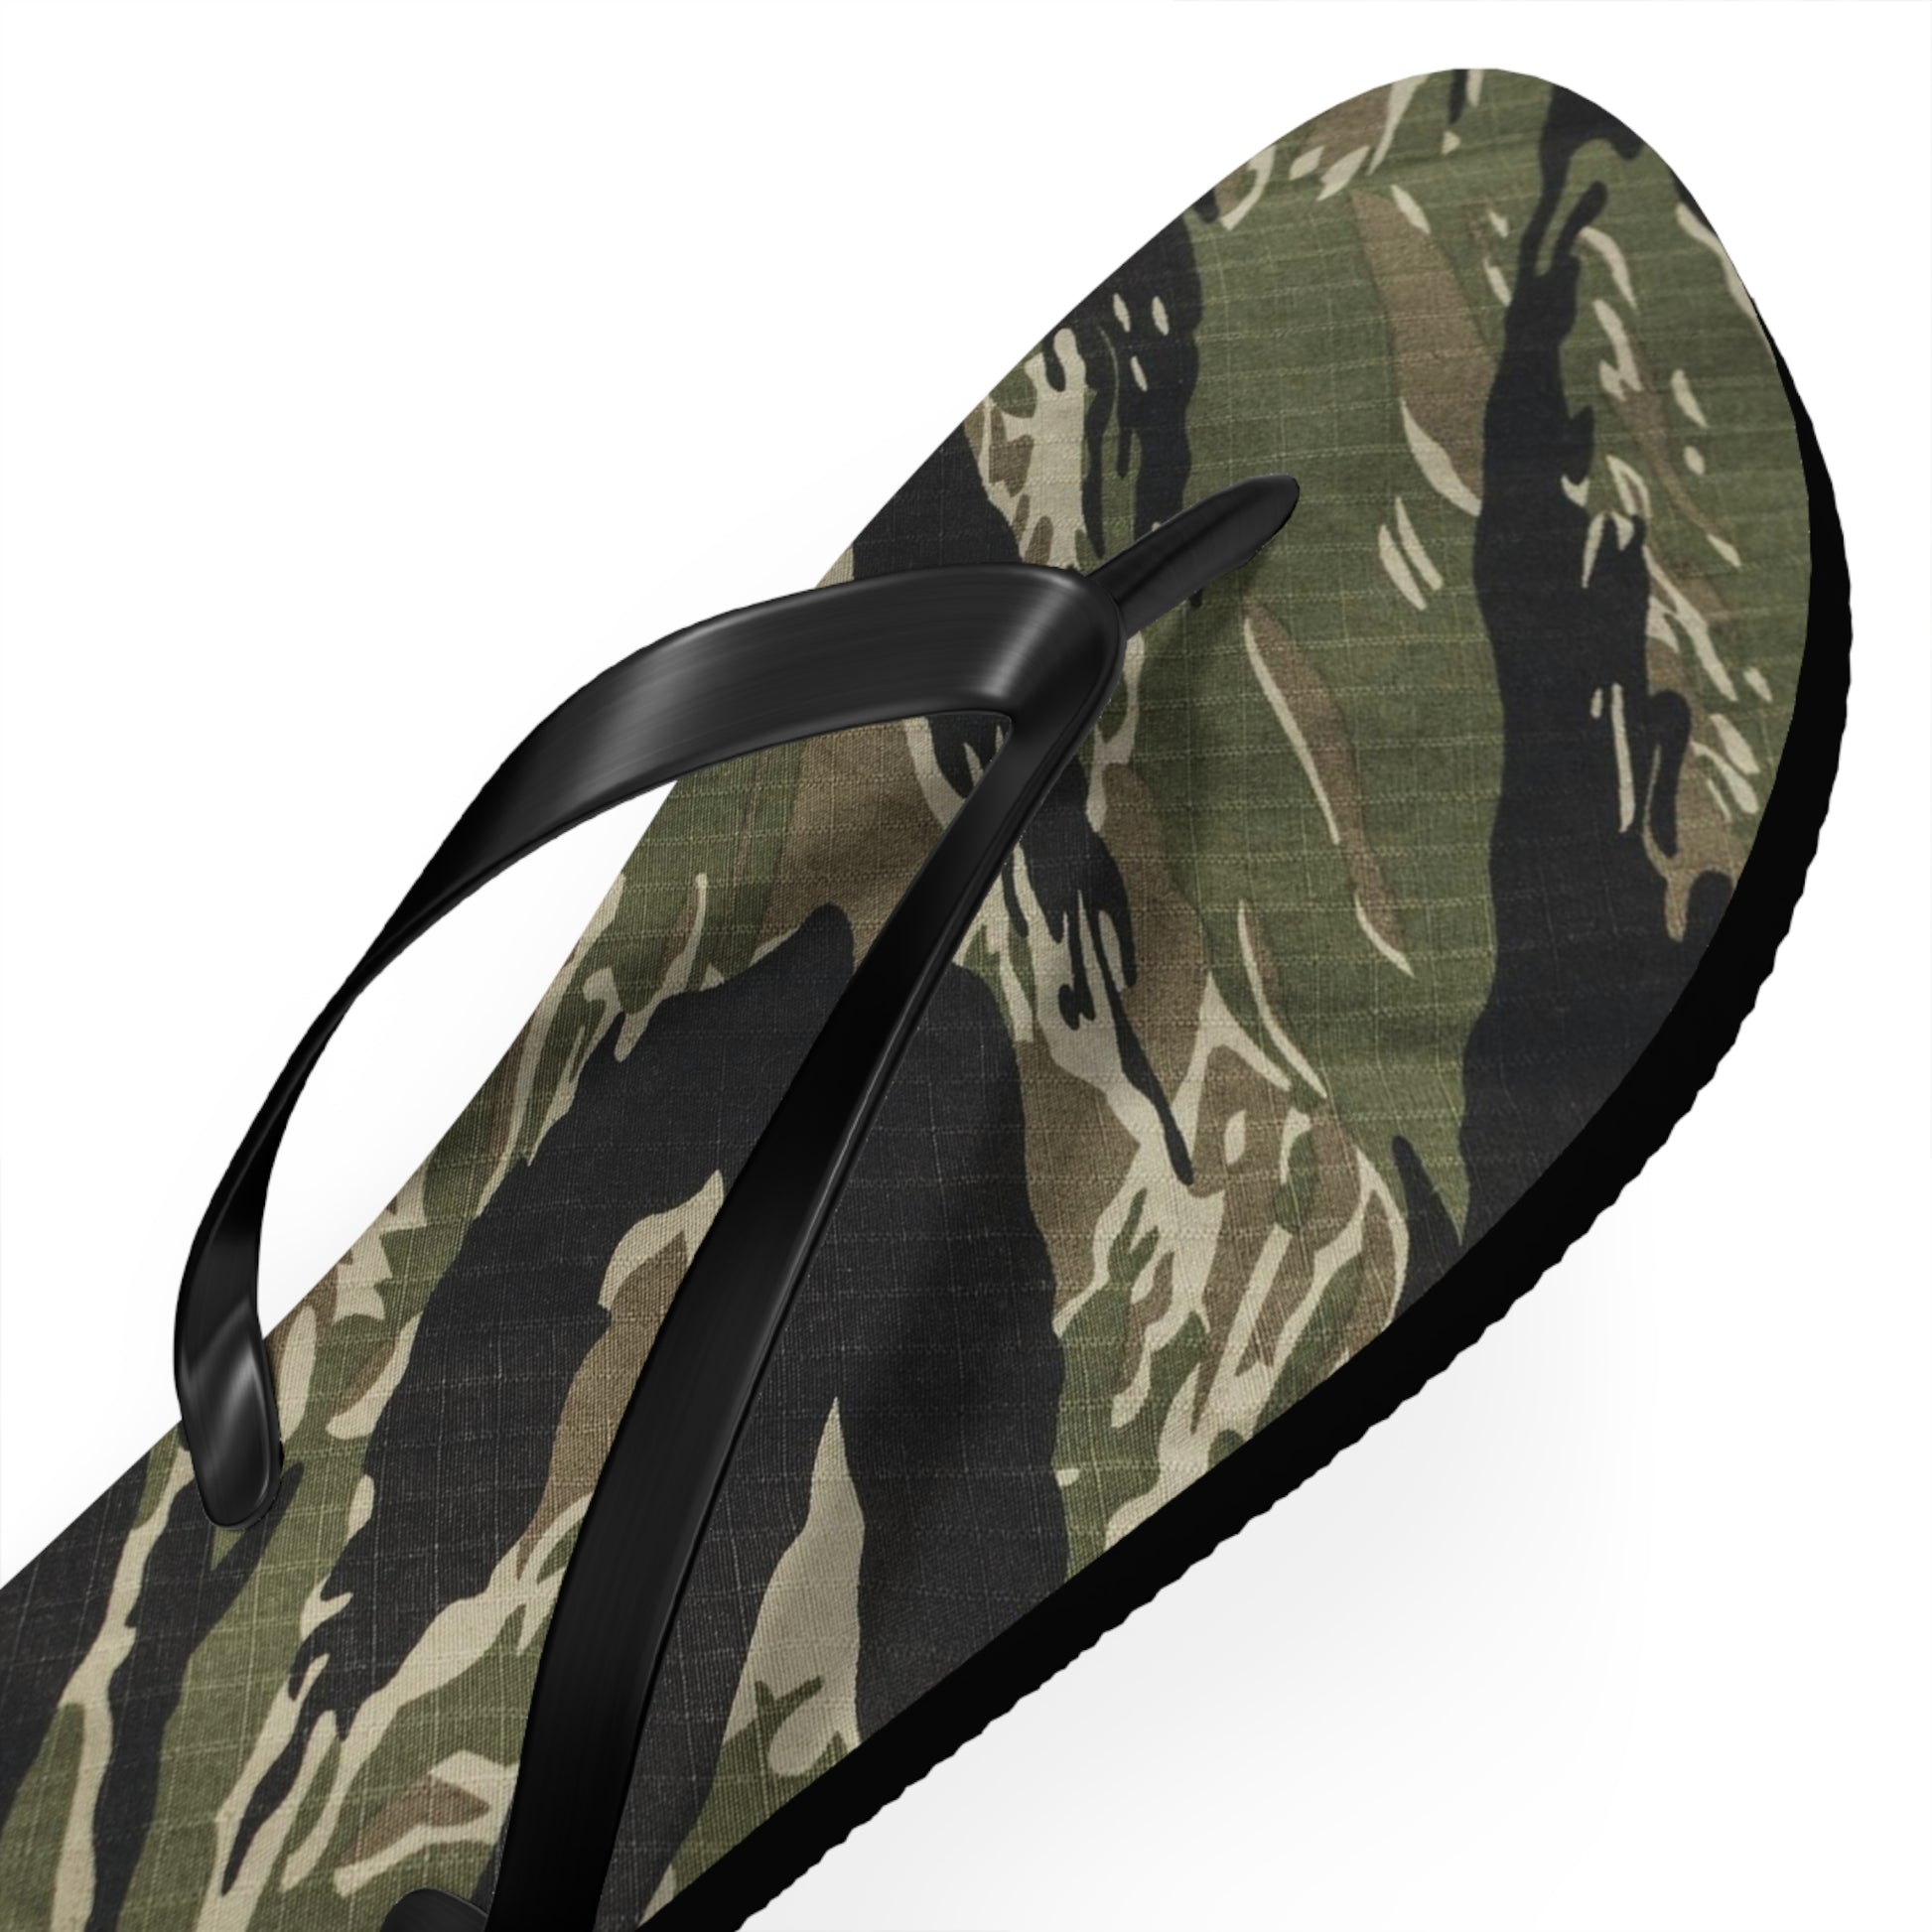 a pair of camouflage flip flops on a white background